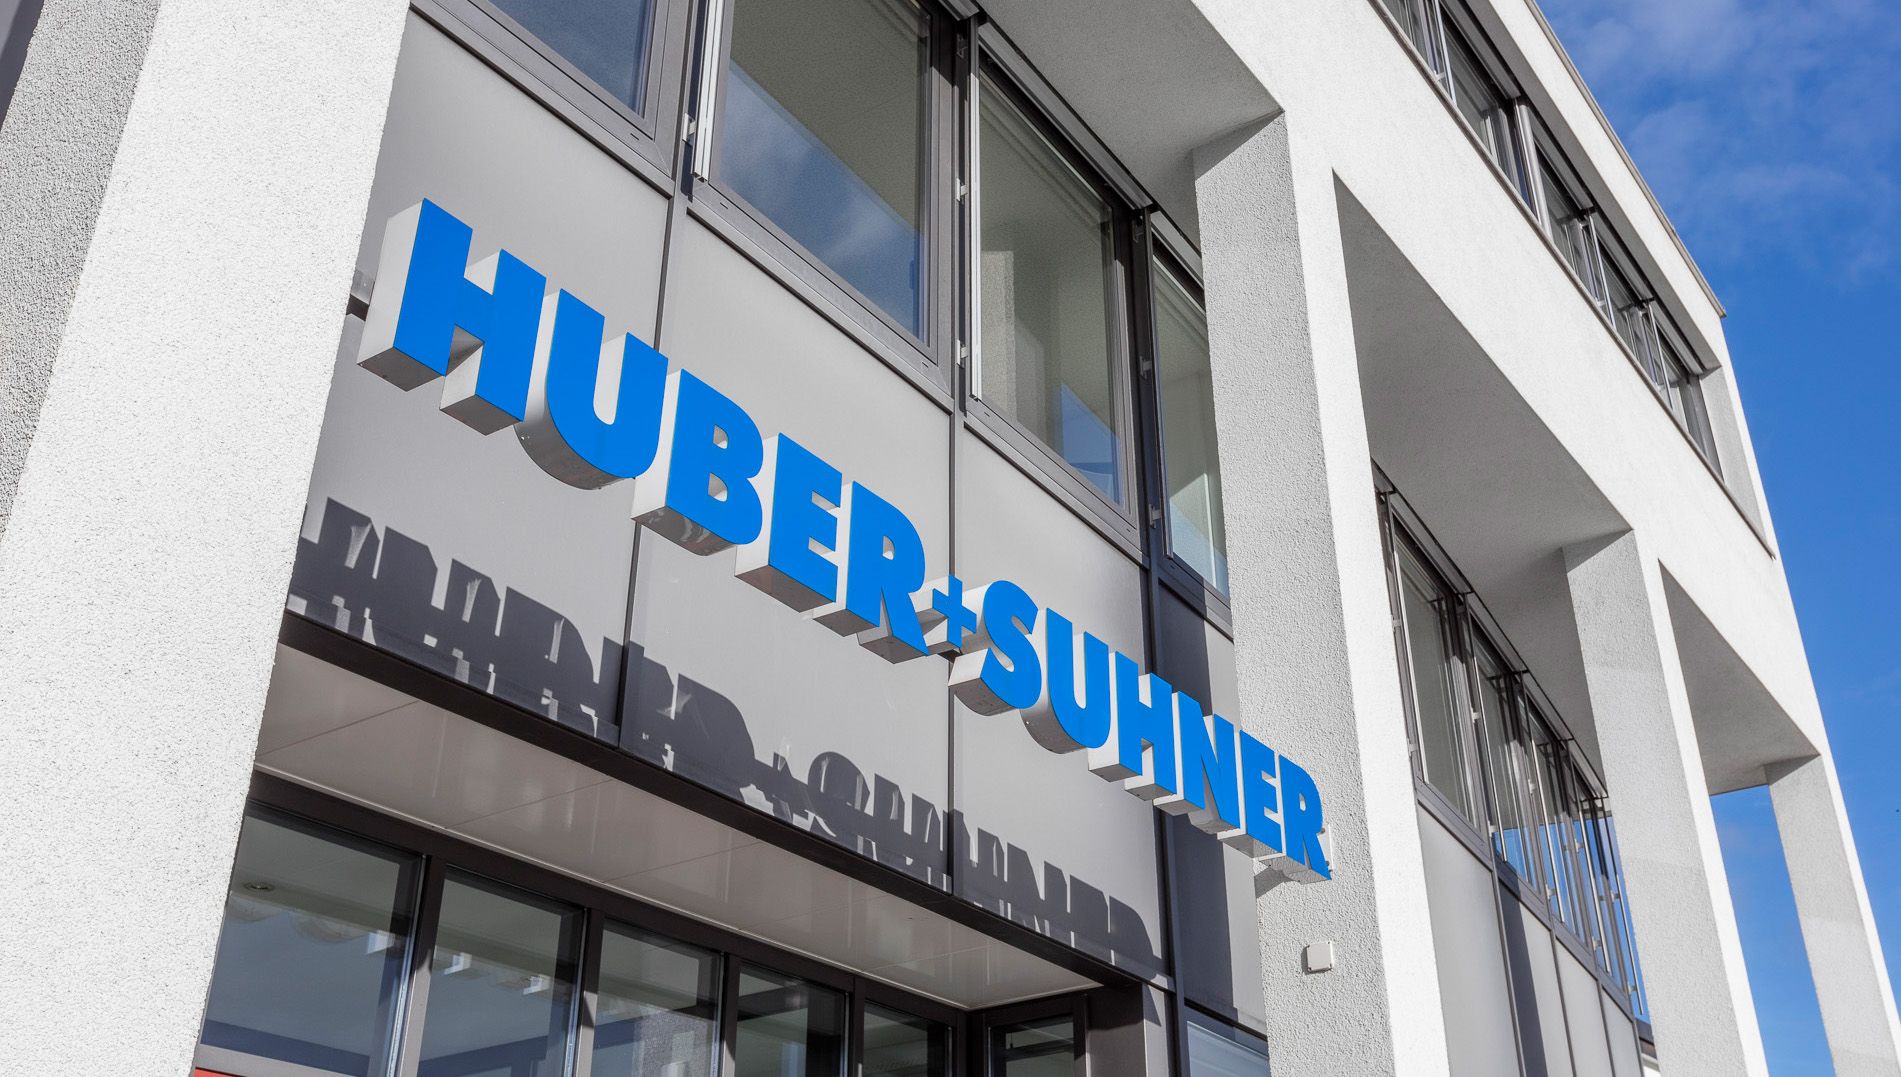 HUBER+SUHNER: weak North American market and high customer inventories lead to lower business volume